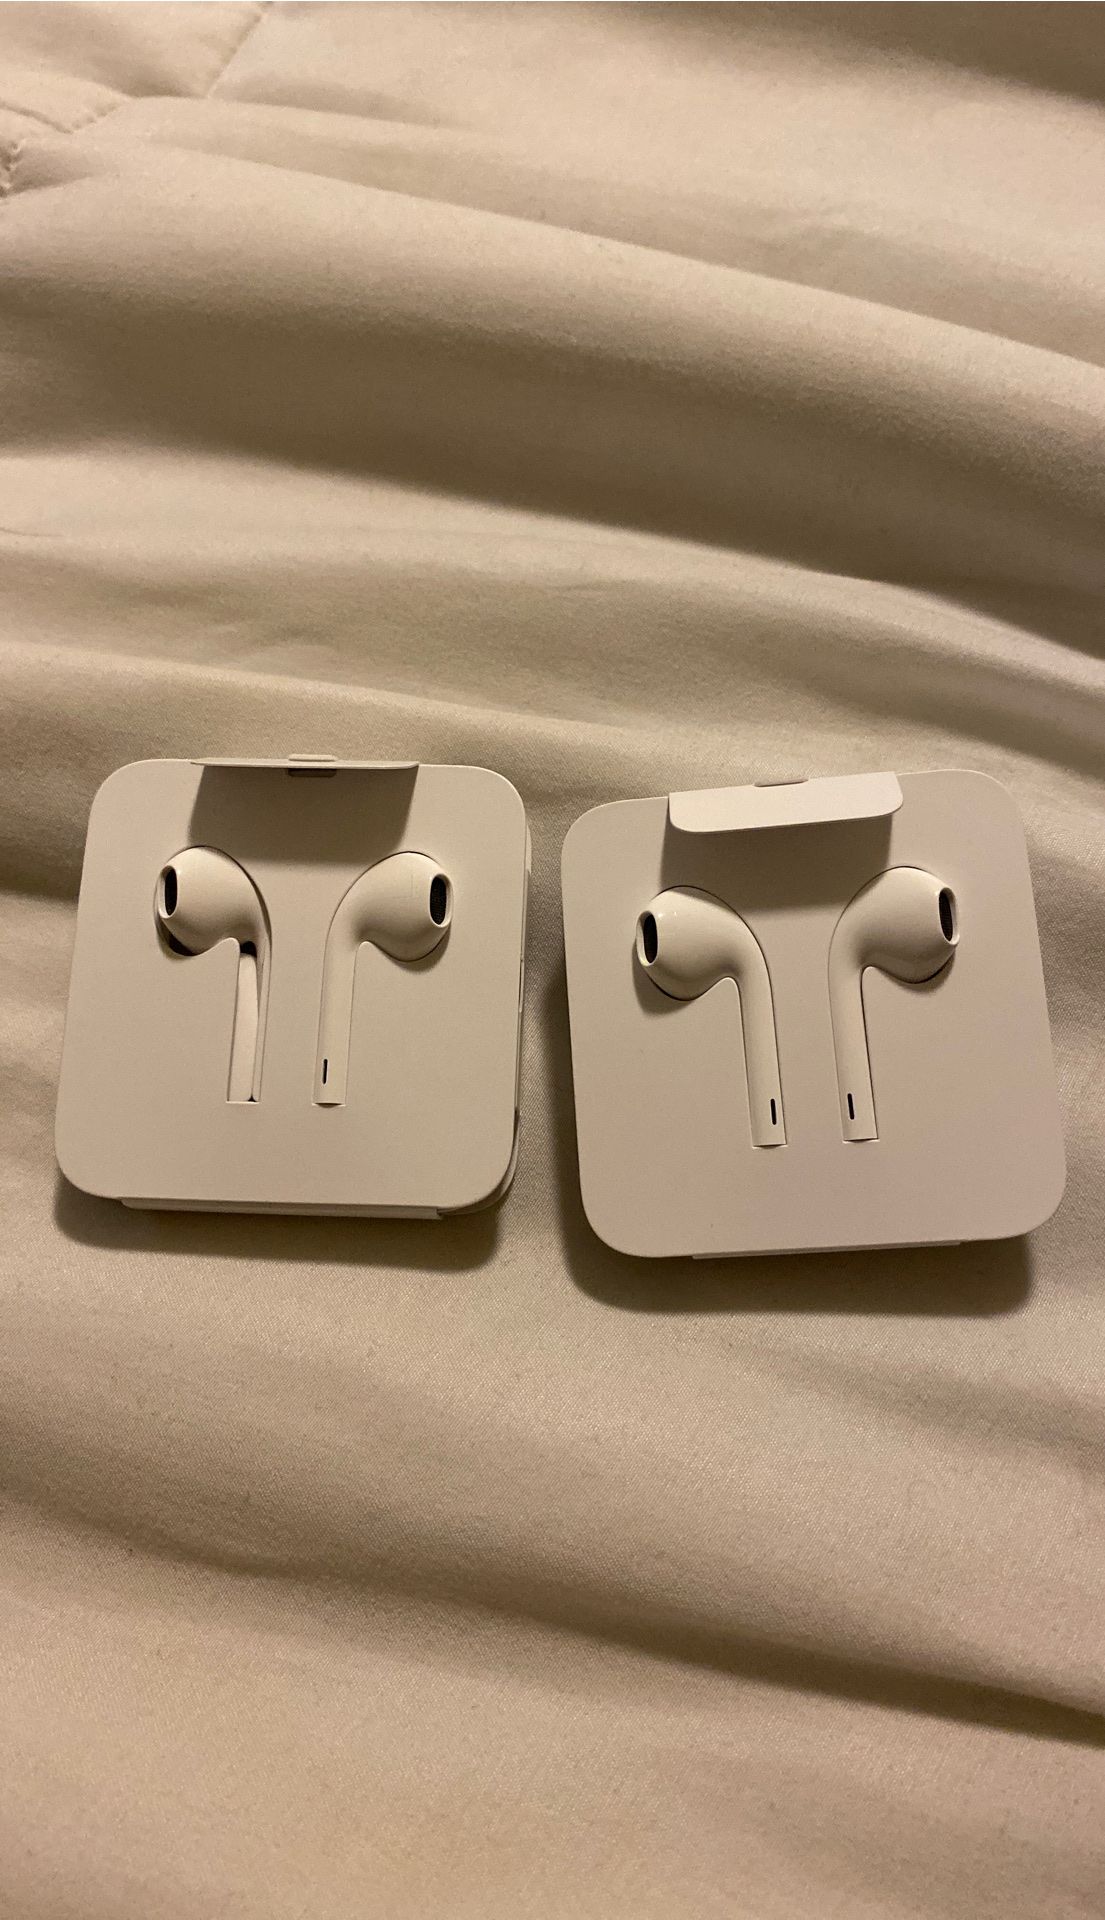 Apple iPhone earbuds